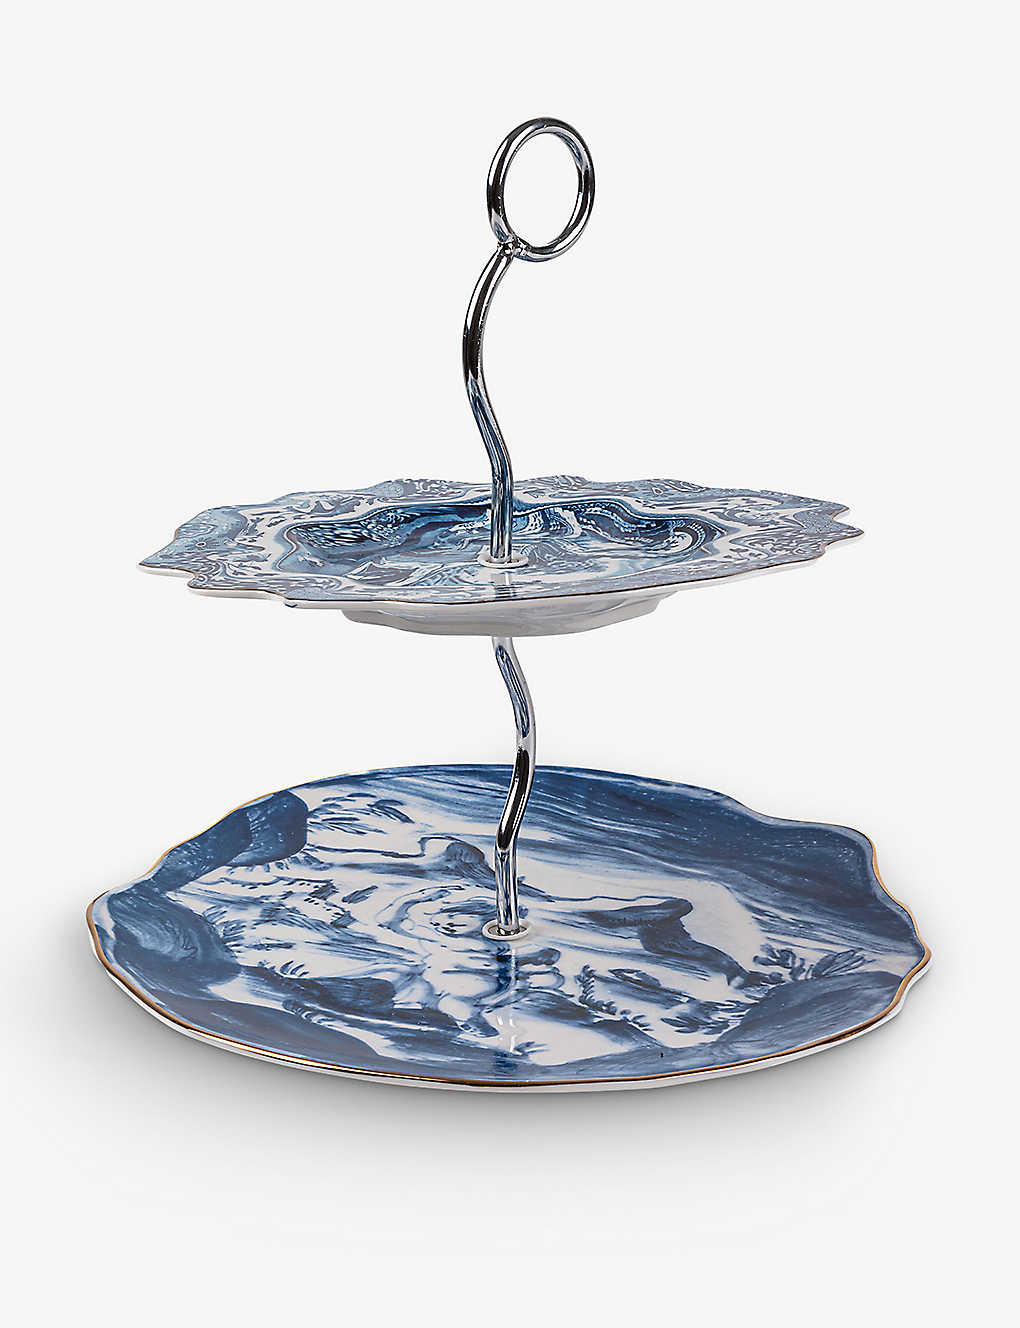 Seletti Acid Graphic-pattern Distorted Porcelain Cake Stand 28cm In Blue